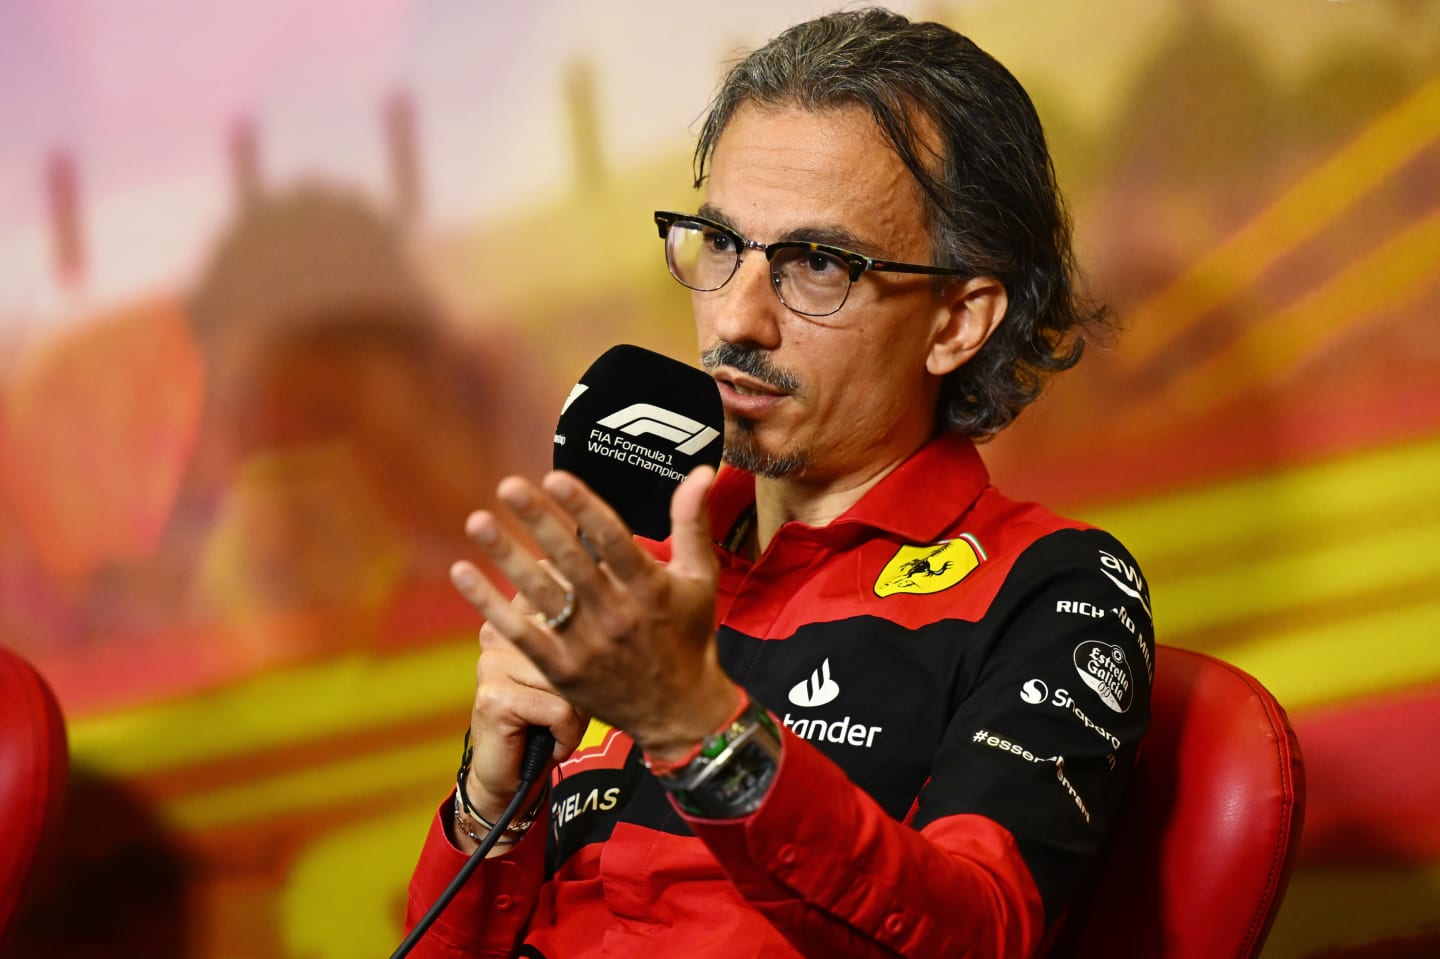 BARCELONA, SPAIN - MAY 21: Laurent Mekies, Scuderia Ferrari Sporting Director talks in the Team Principals Press Conference prior to practice ahead of the F1 Grand Prix of Spain at Circuit de Barcelona-Catalunya on May 21, 2022 in Barcelona, Spain. (Photo by Clive Mason/Getty Images)